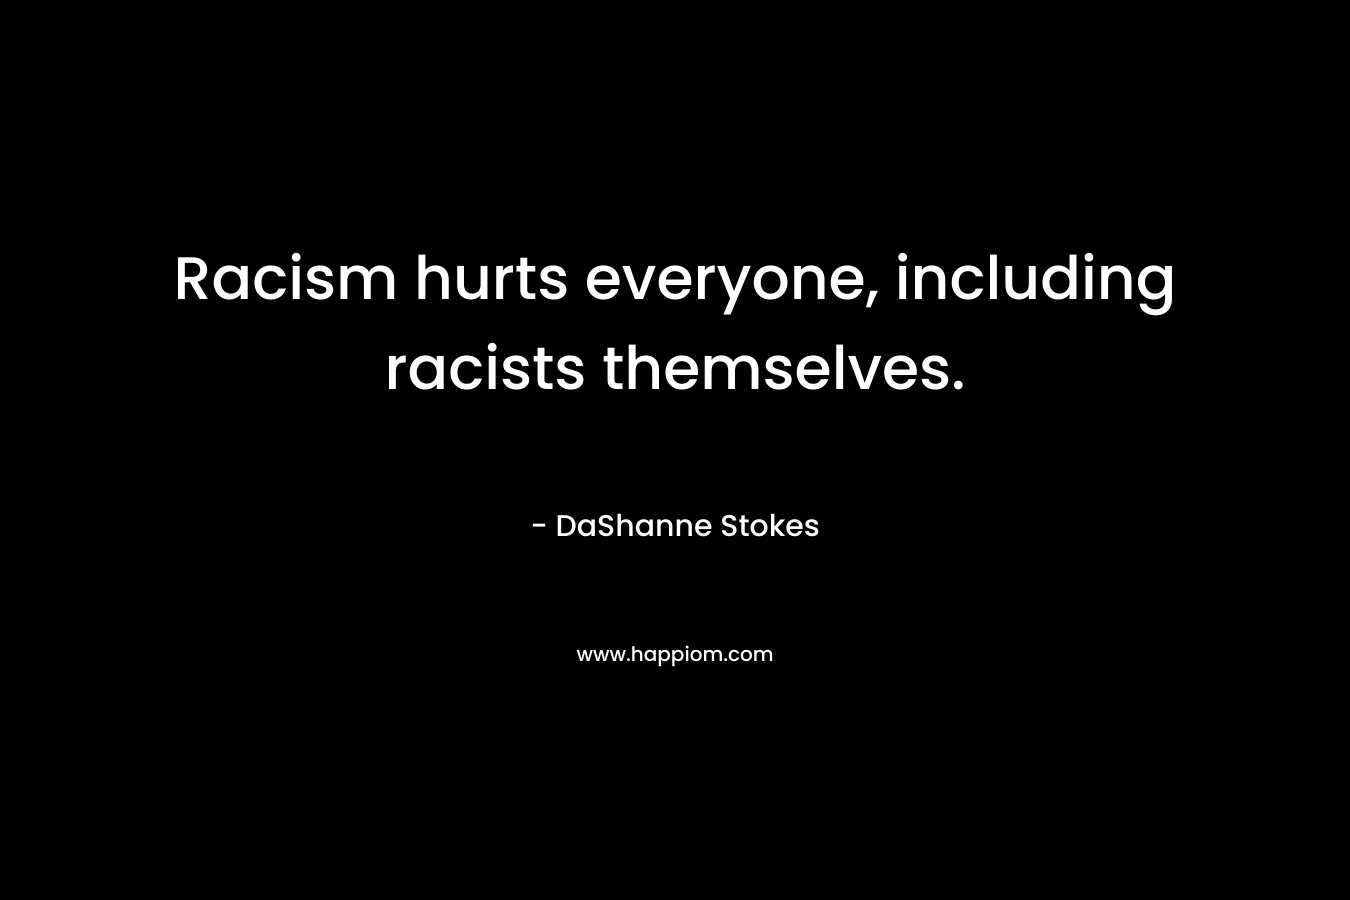 Racism hurts everyone, including racists themselves.